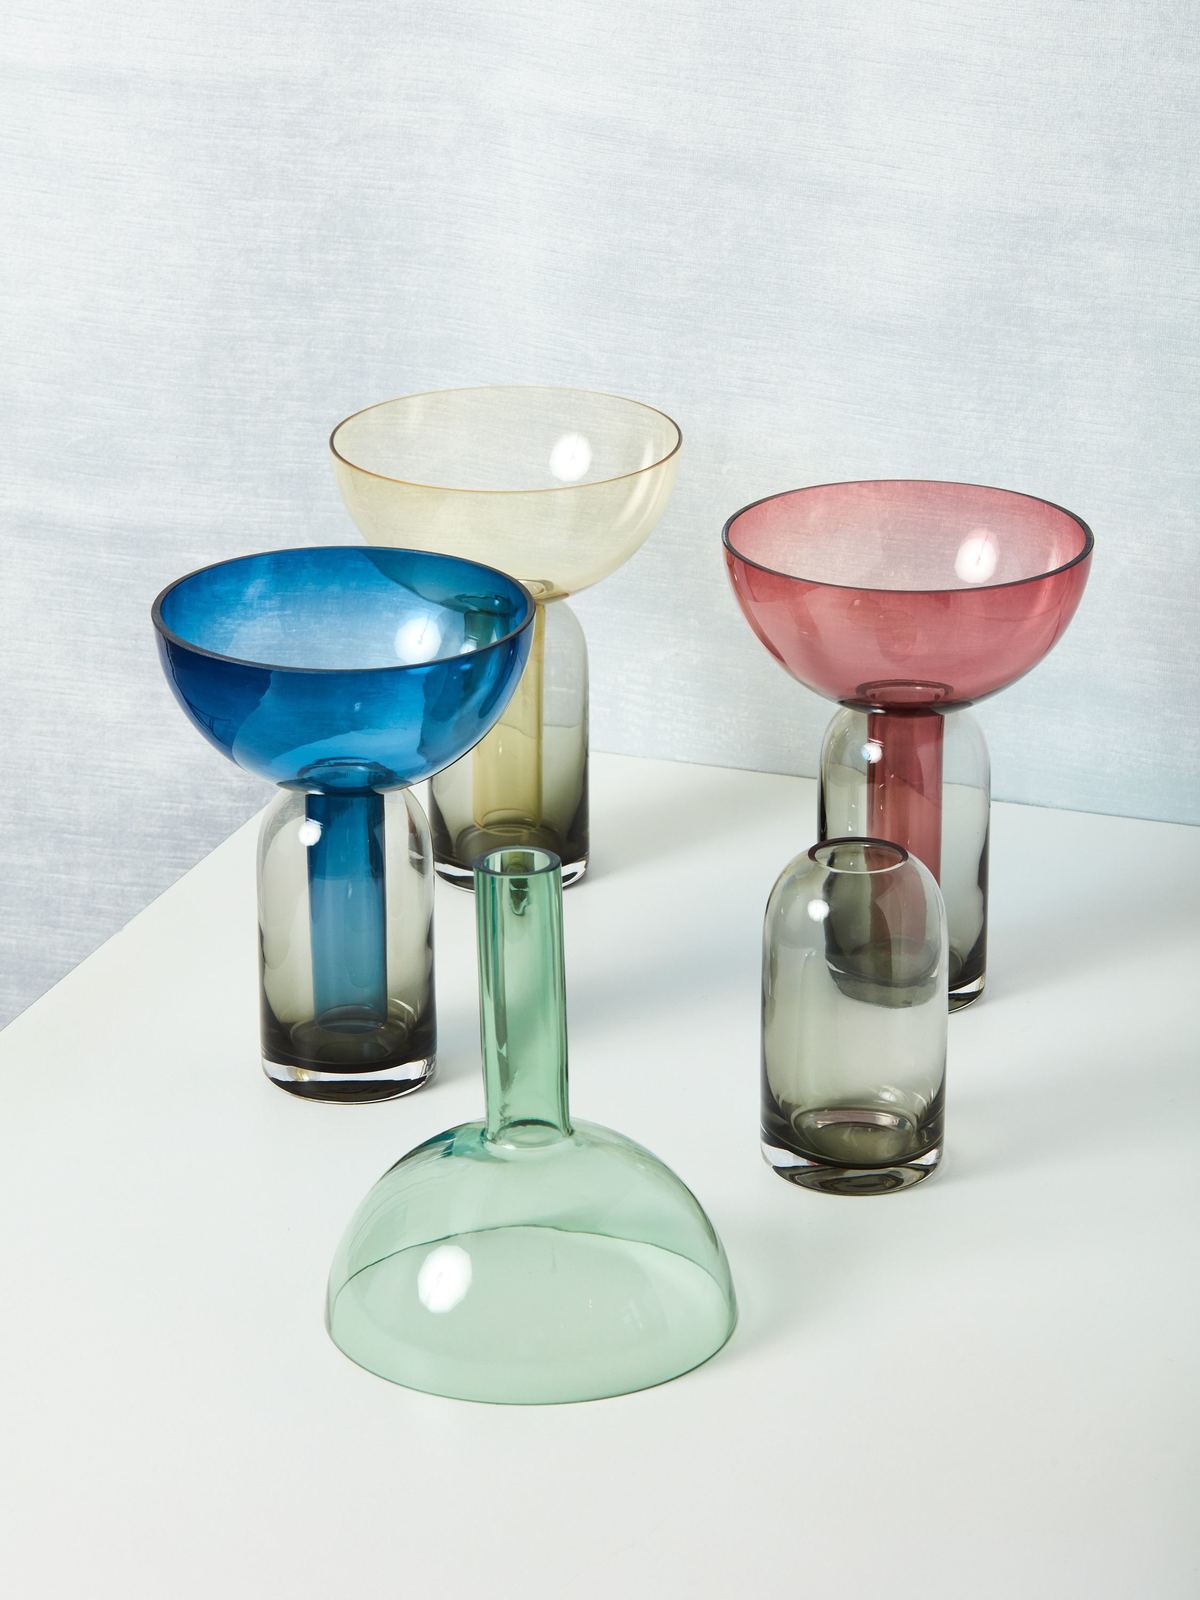 The Best 2-in-1 Decor Is Shaped Like an Hourglass